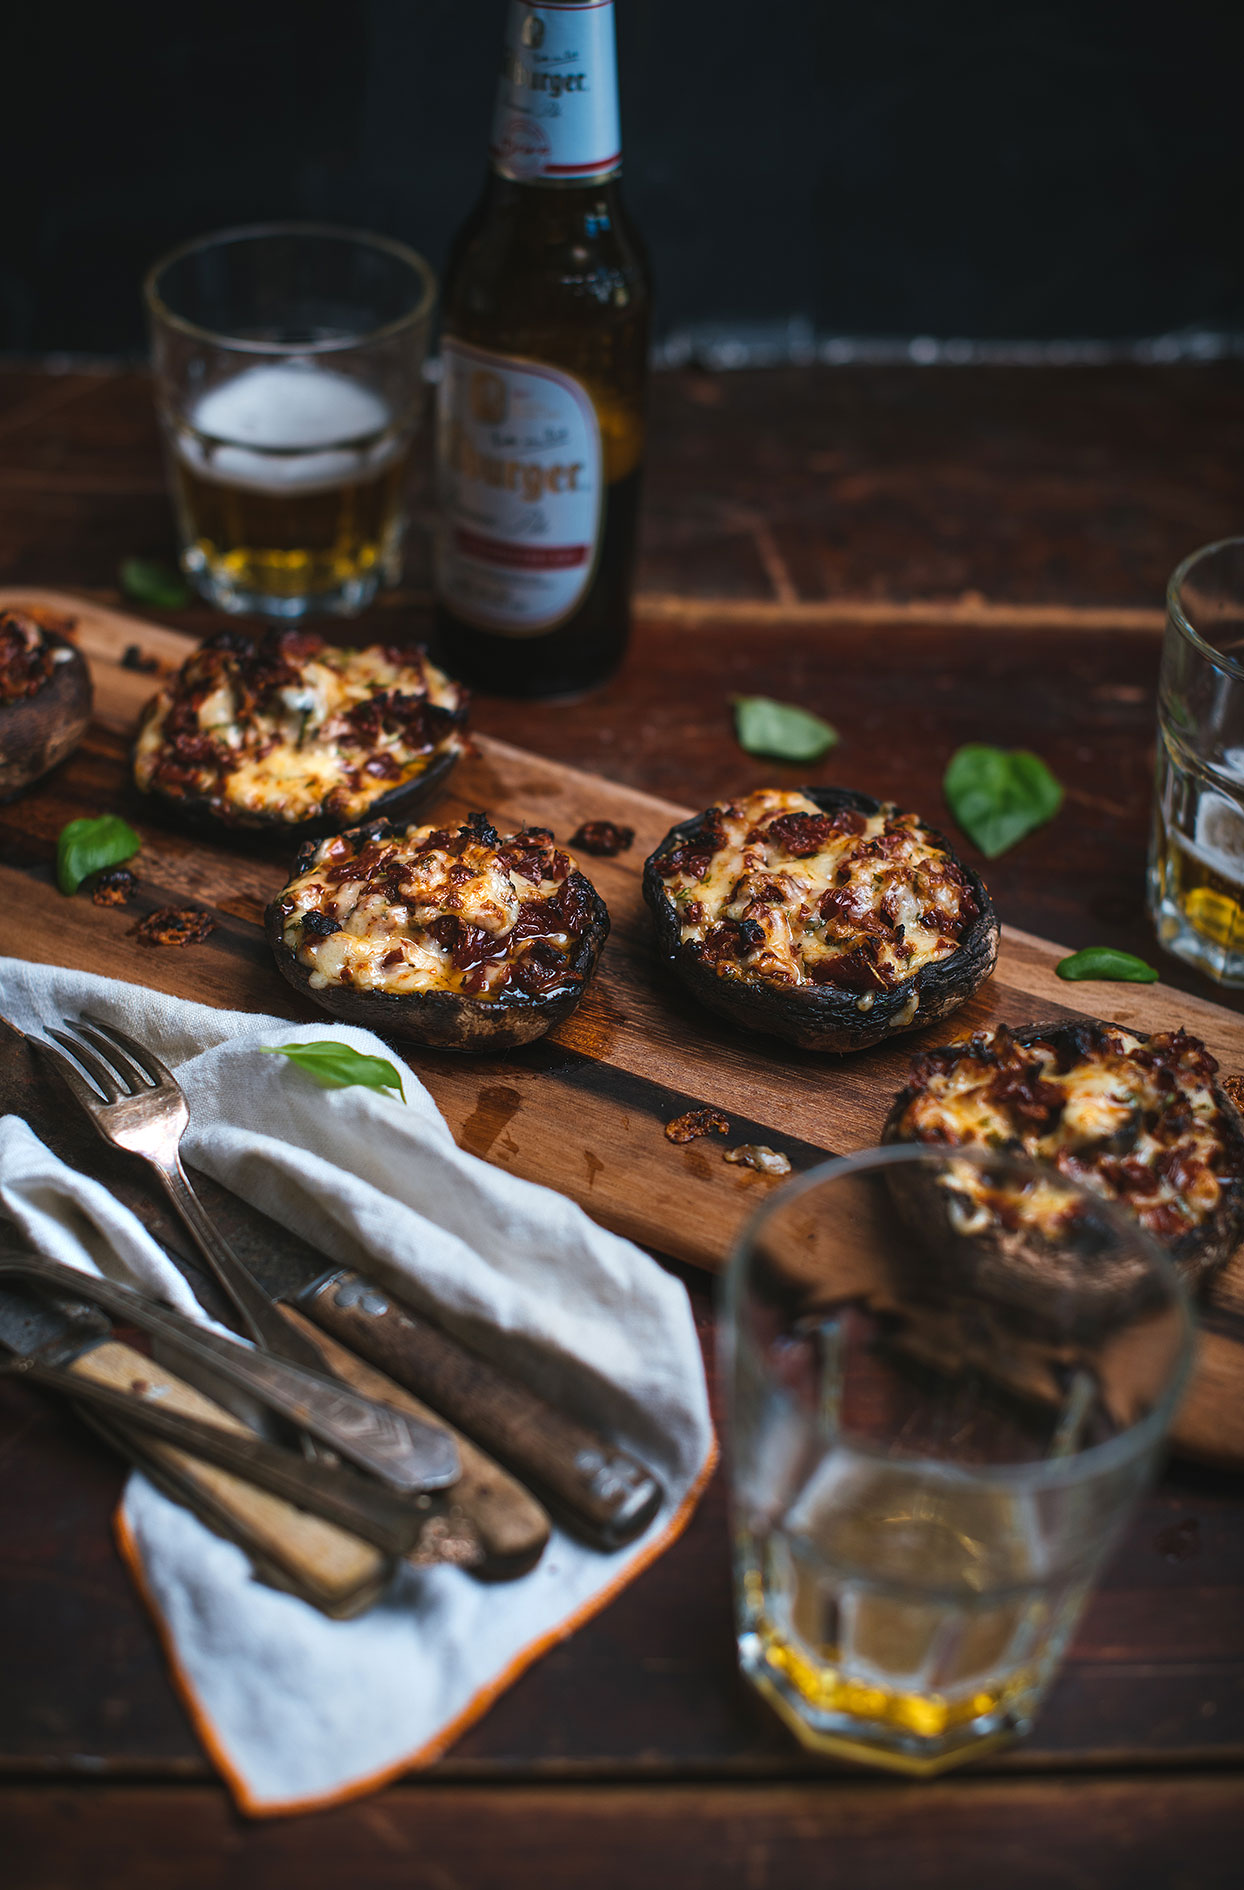 Portobellos stuffed with cheese, sun-dried tomatoes and basil